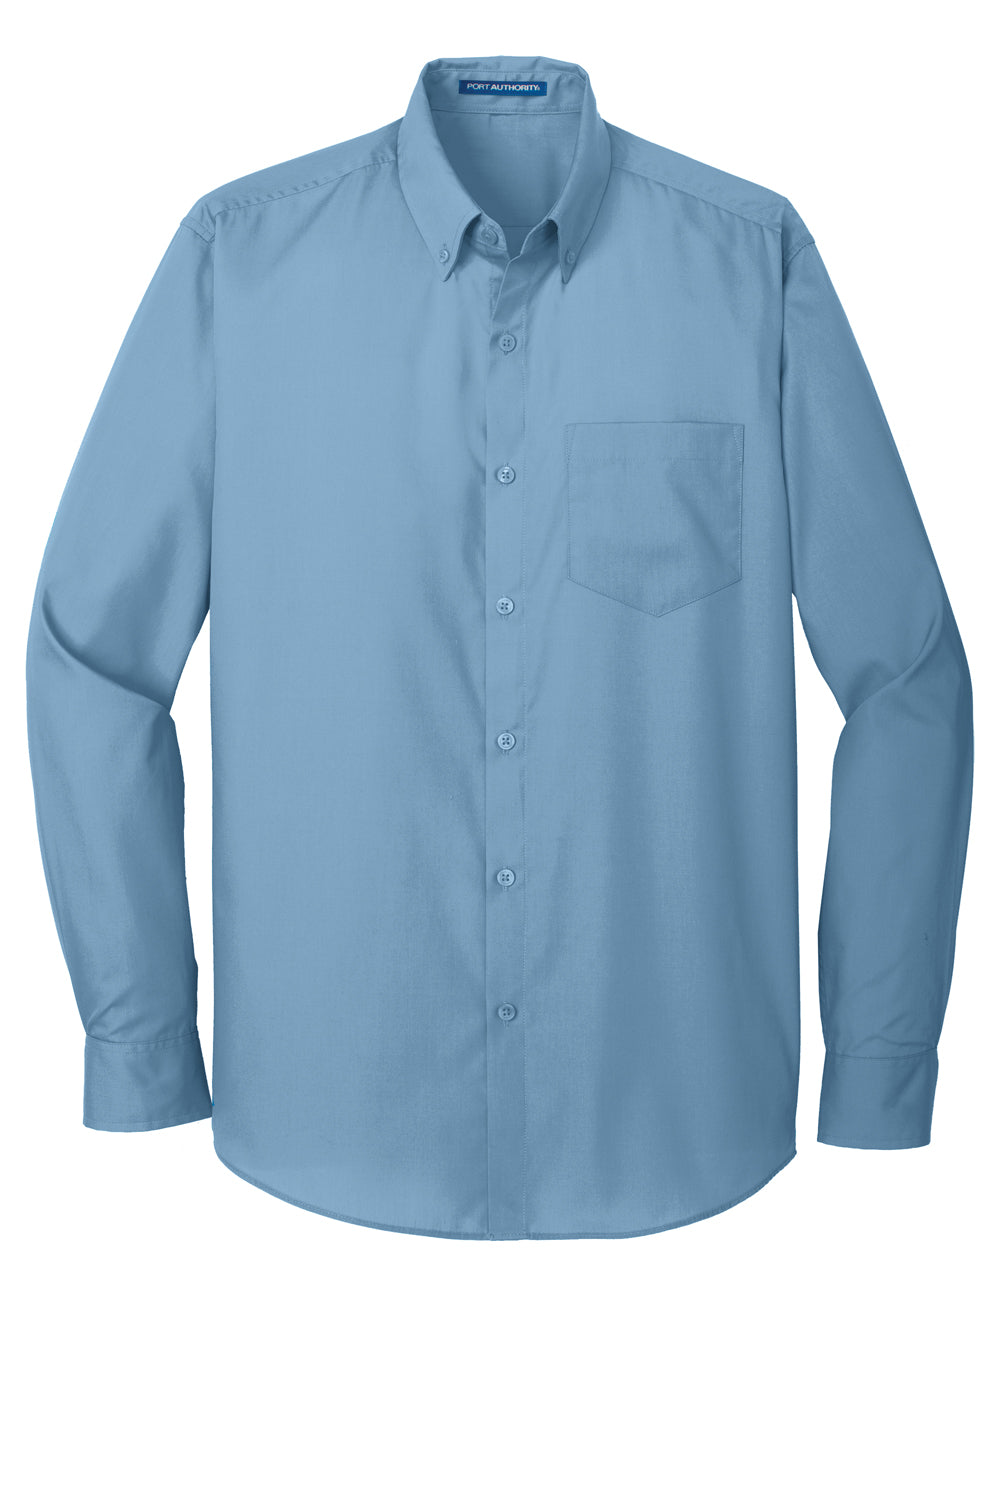 Port Authority W100/TW100 Carefree Stain Resistant Long Sleeve Button Down Shirt w/ Pocket Carolina Blue Flat Front